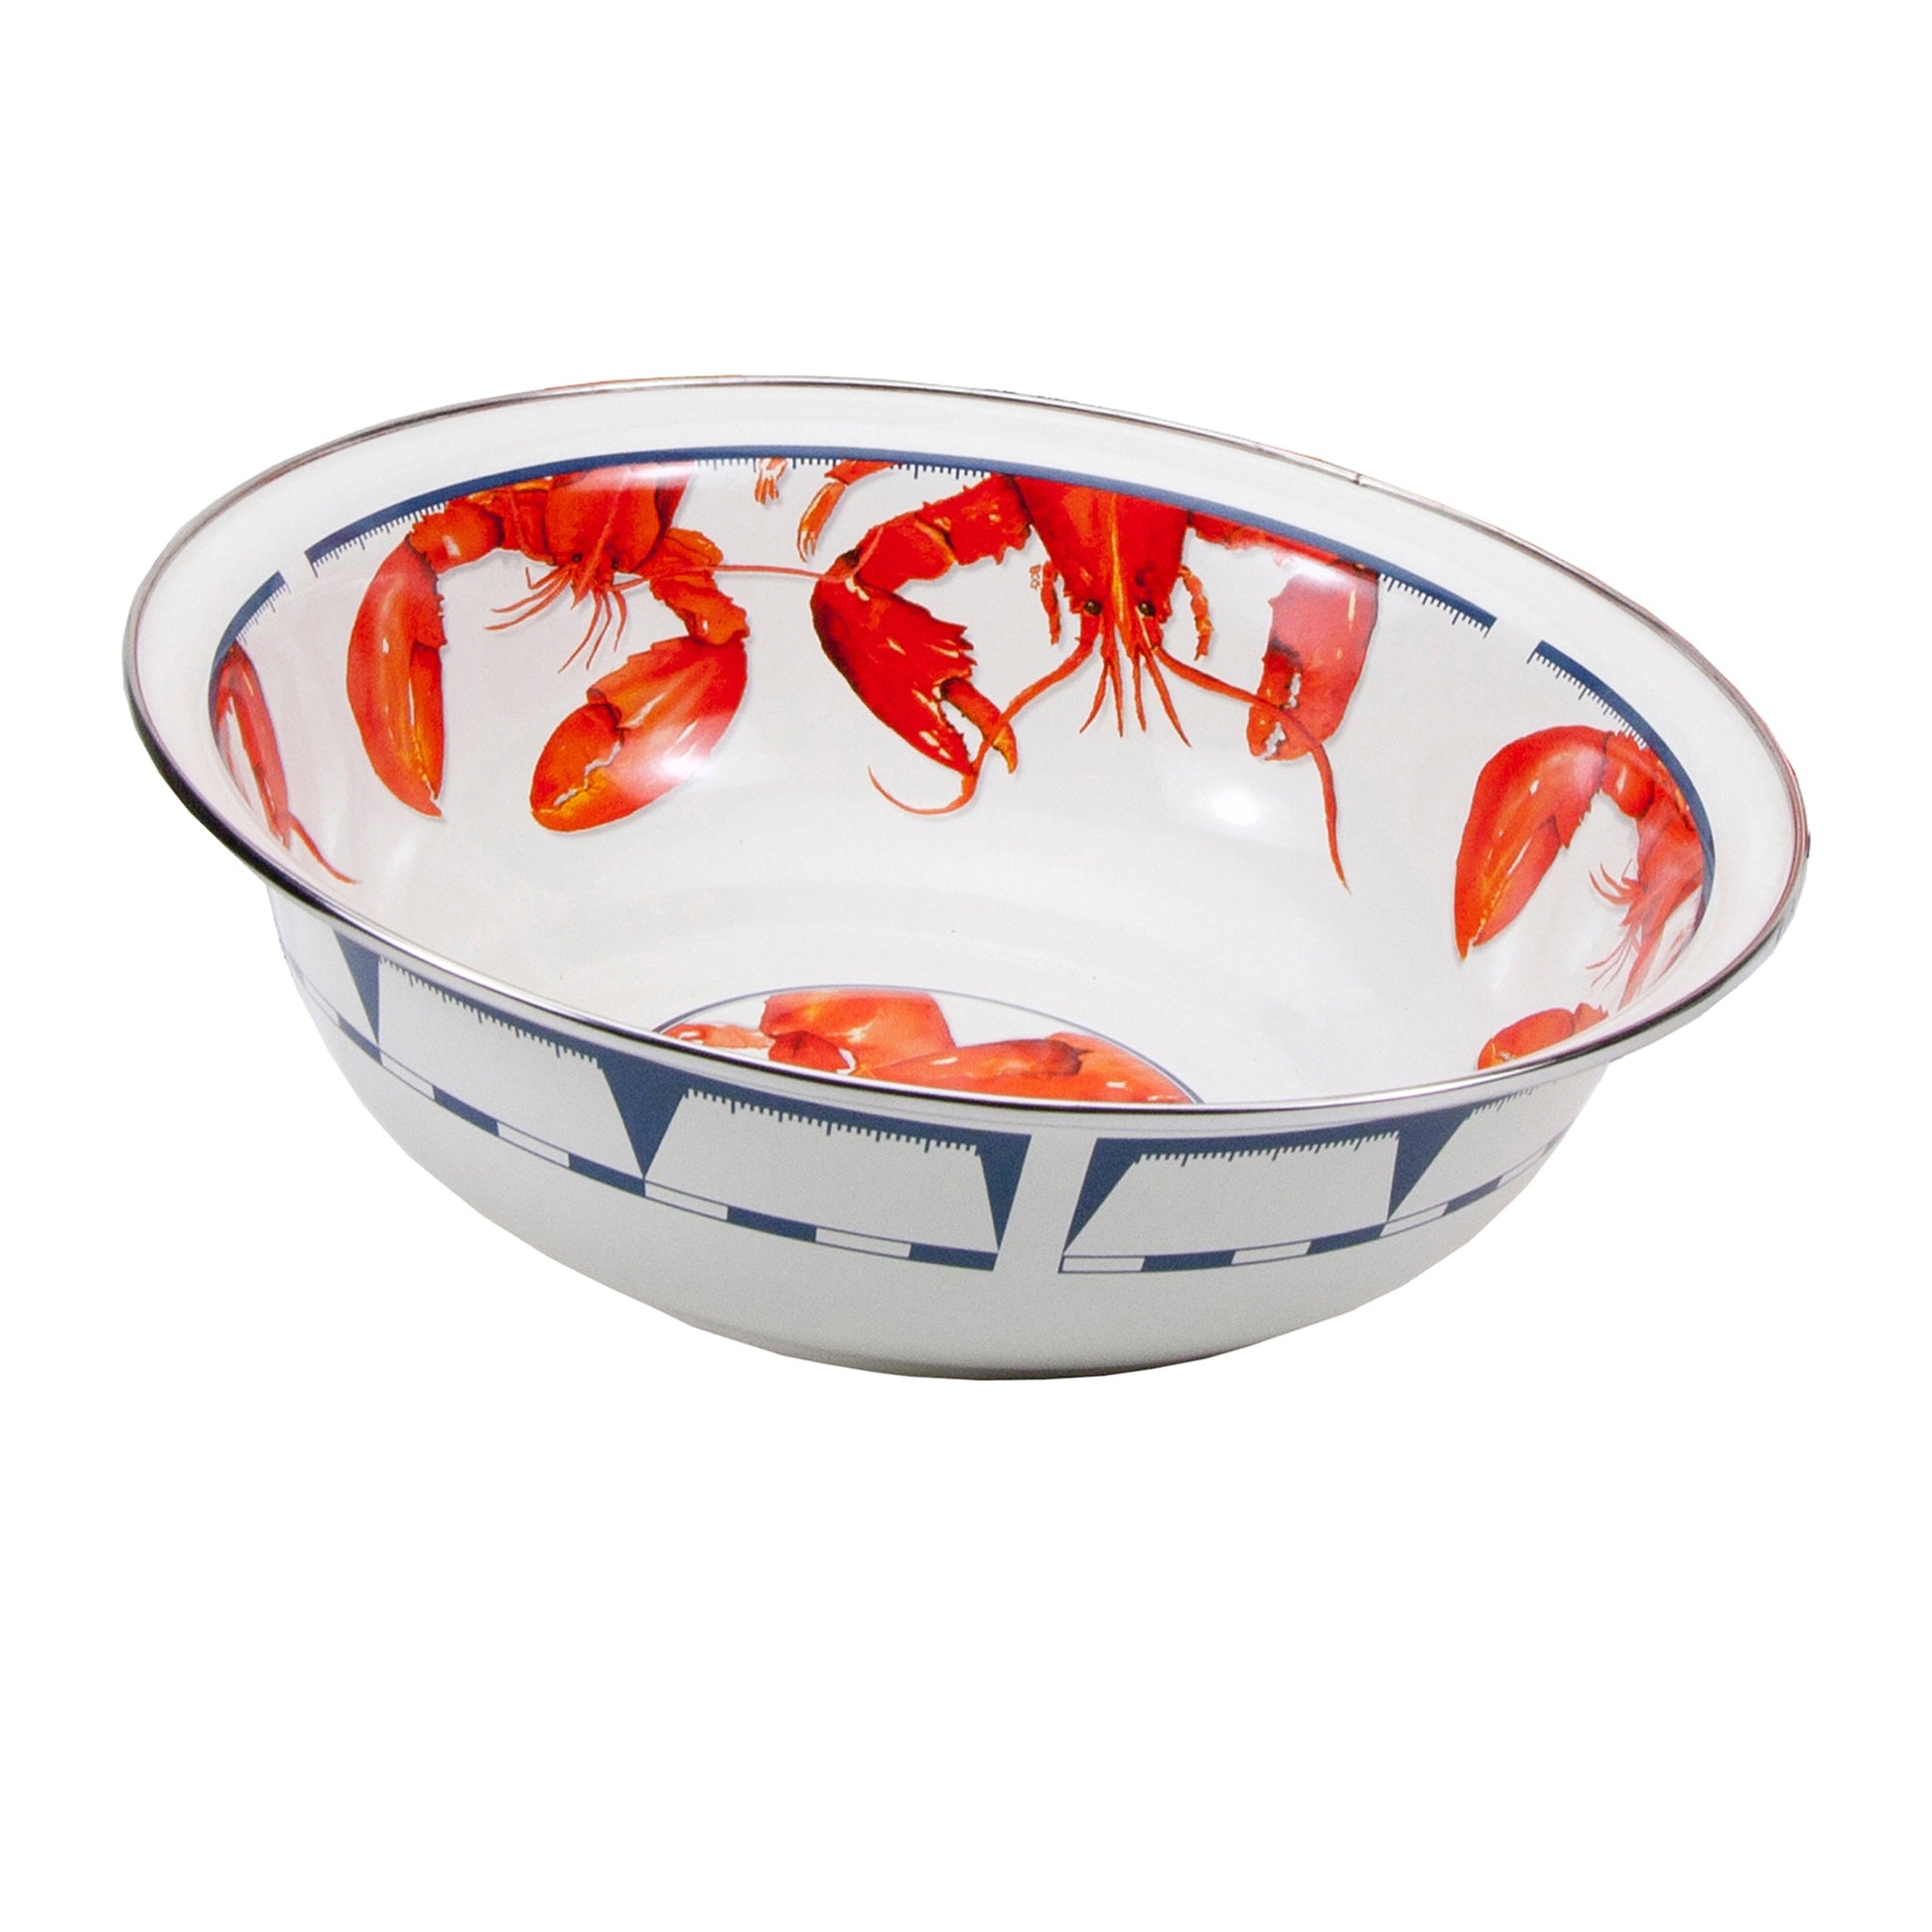 Lobster Serving Bowl-Serveware-Nautical Decor and Gifts